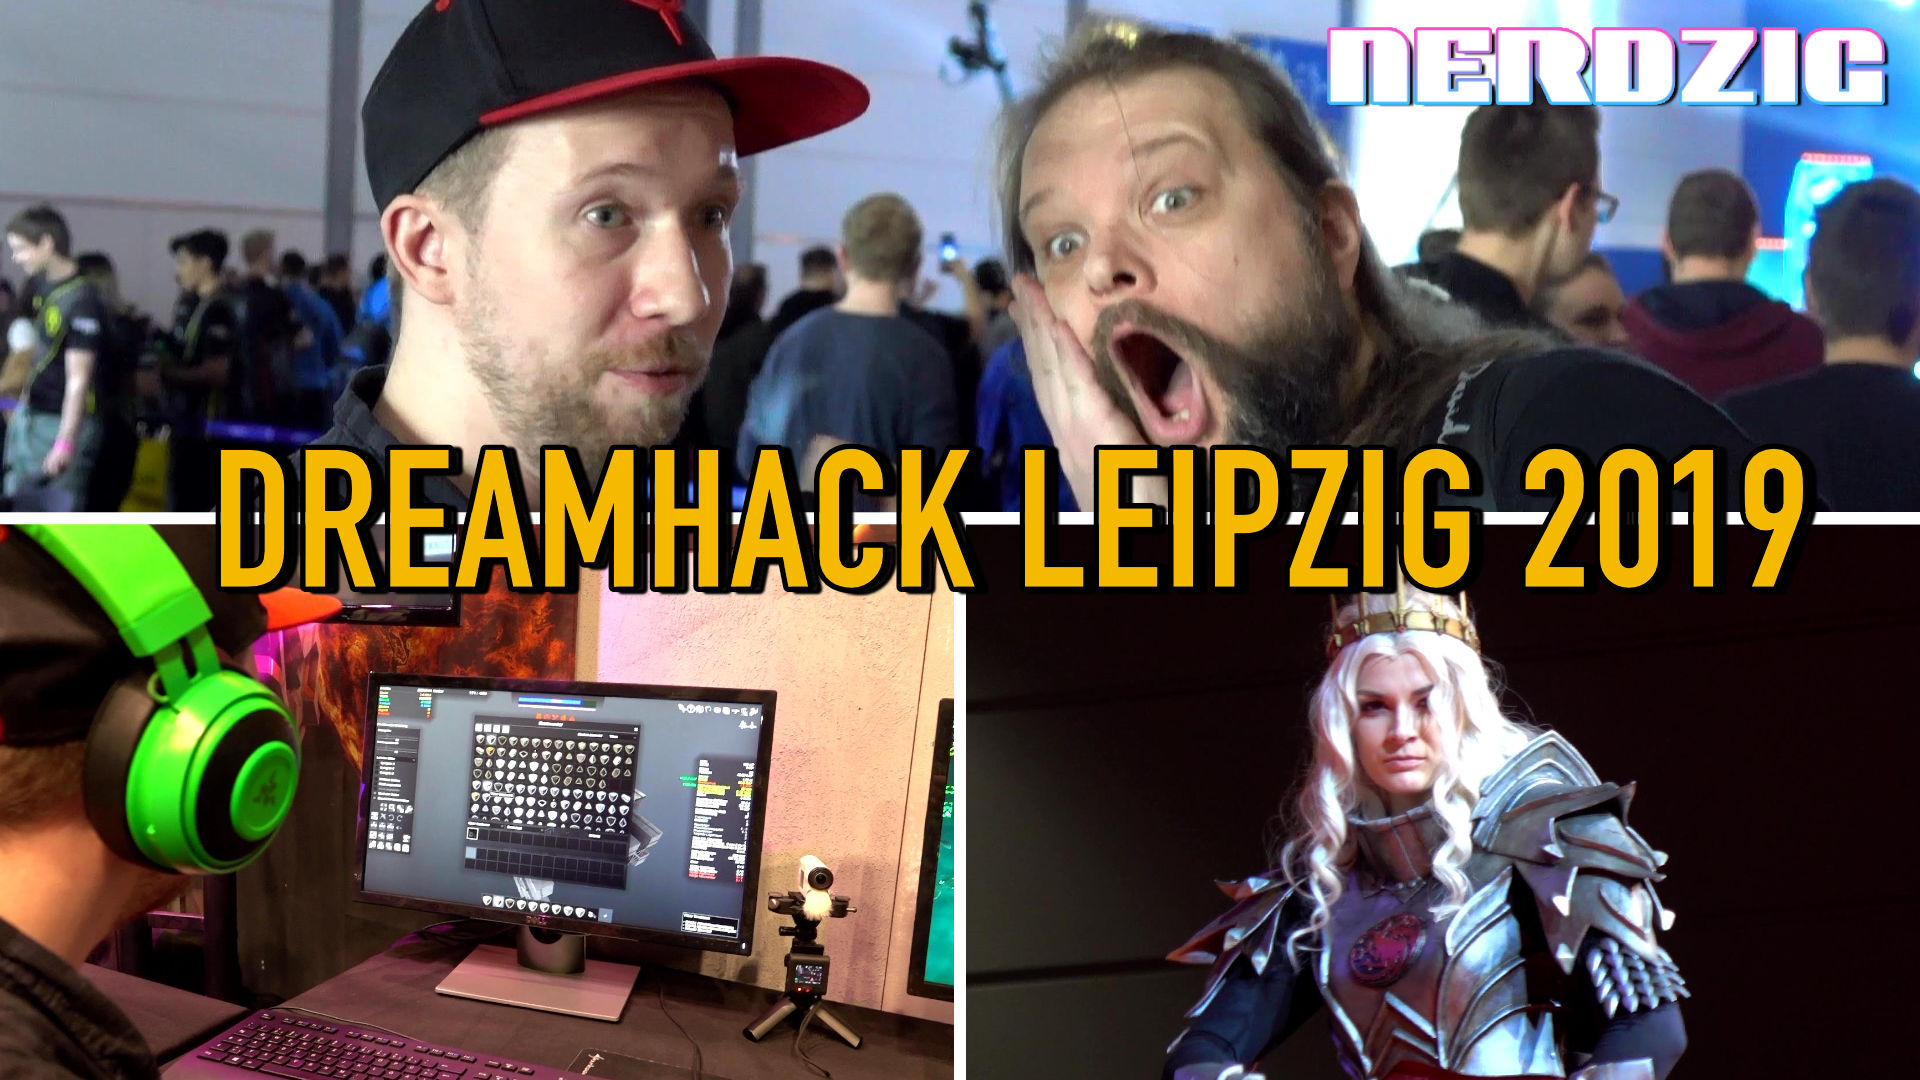 Dreamhack 2019 - Action, Lan-Party, Cosplay, Indie-Entwickler!